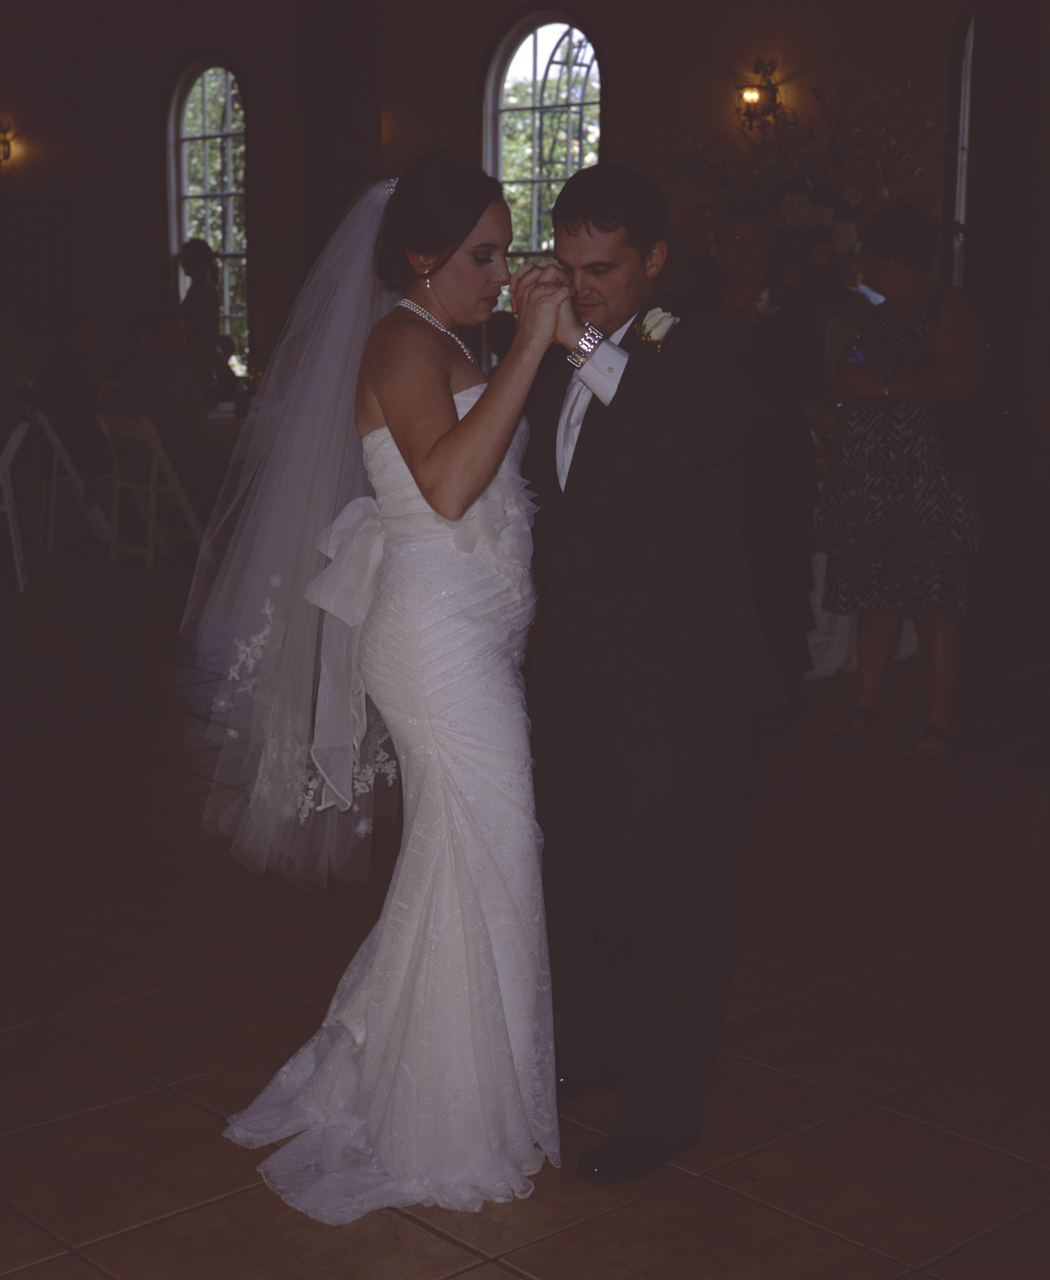 Emily and Eric starting their 1st dance as a married couple at their Wedding Reception at L'EGLISE